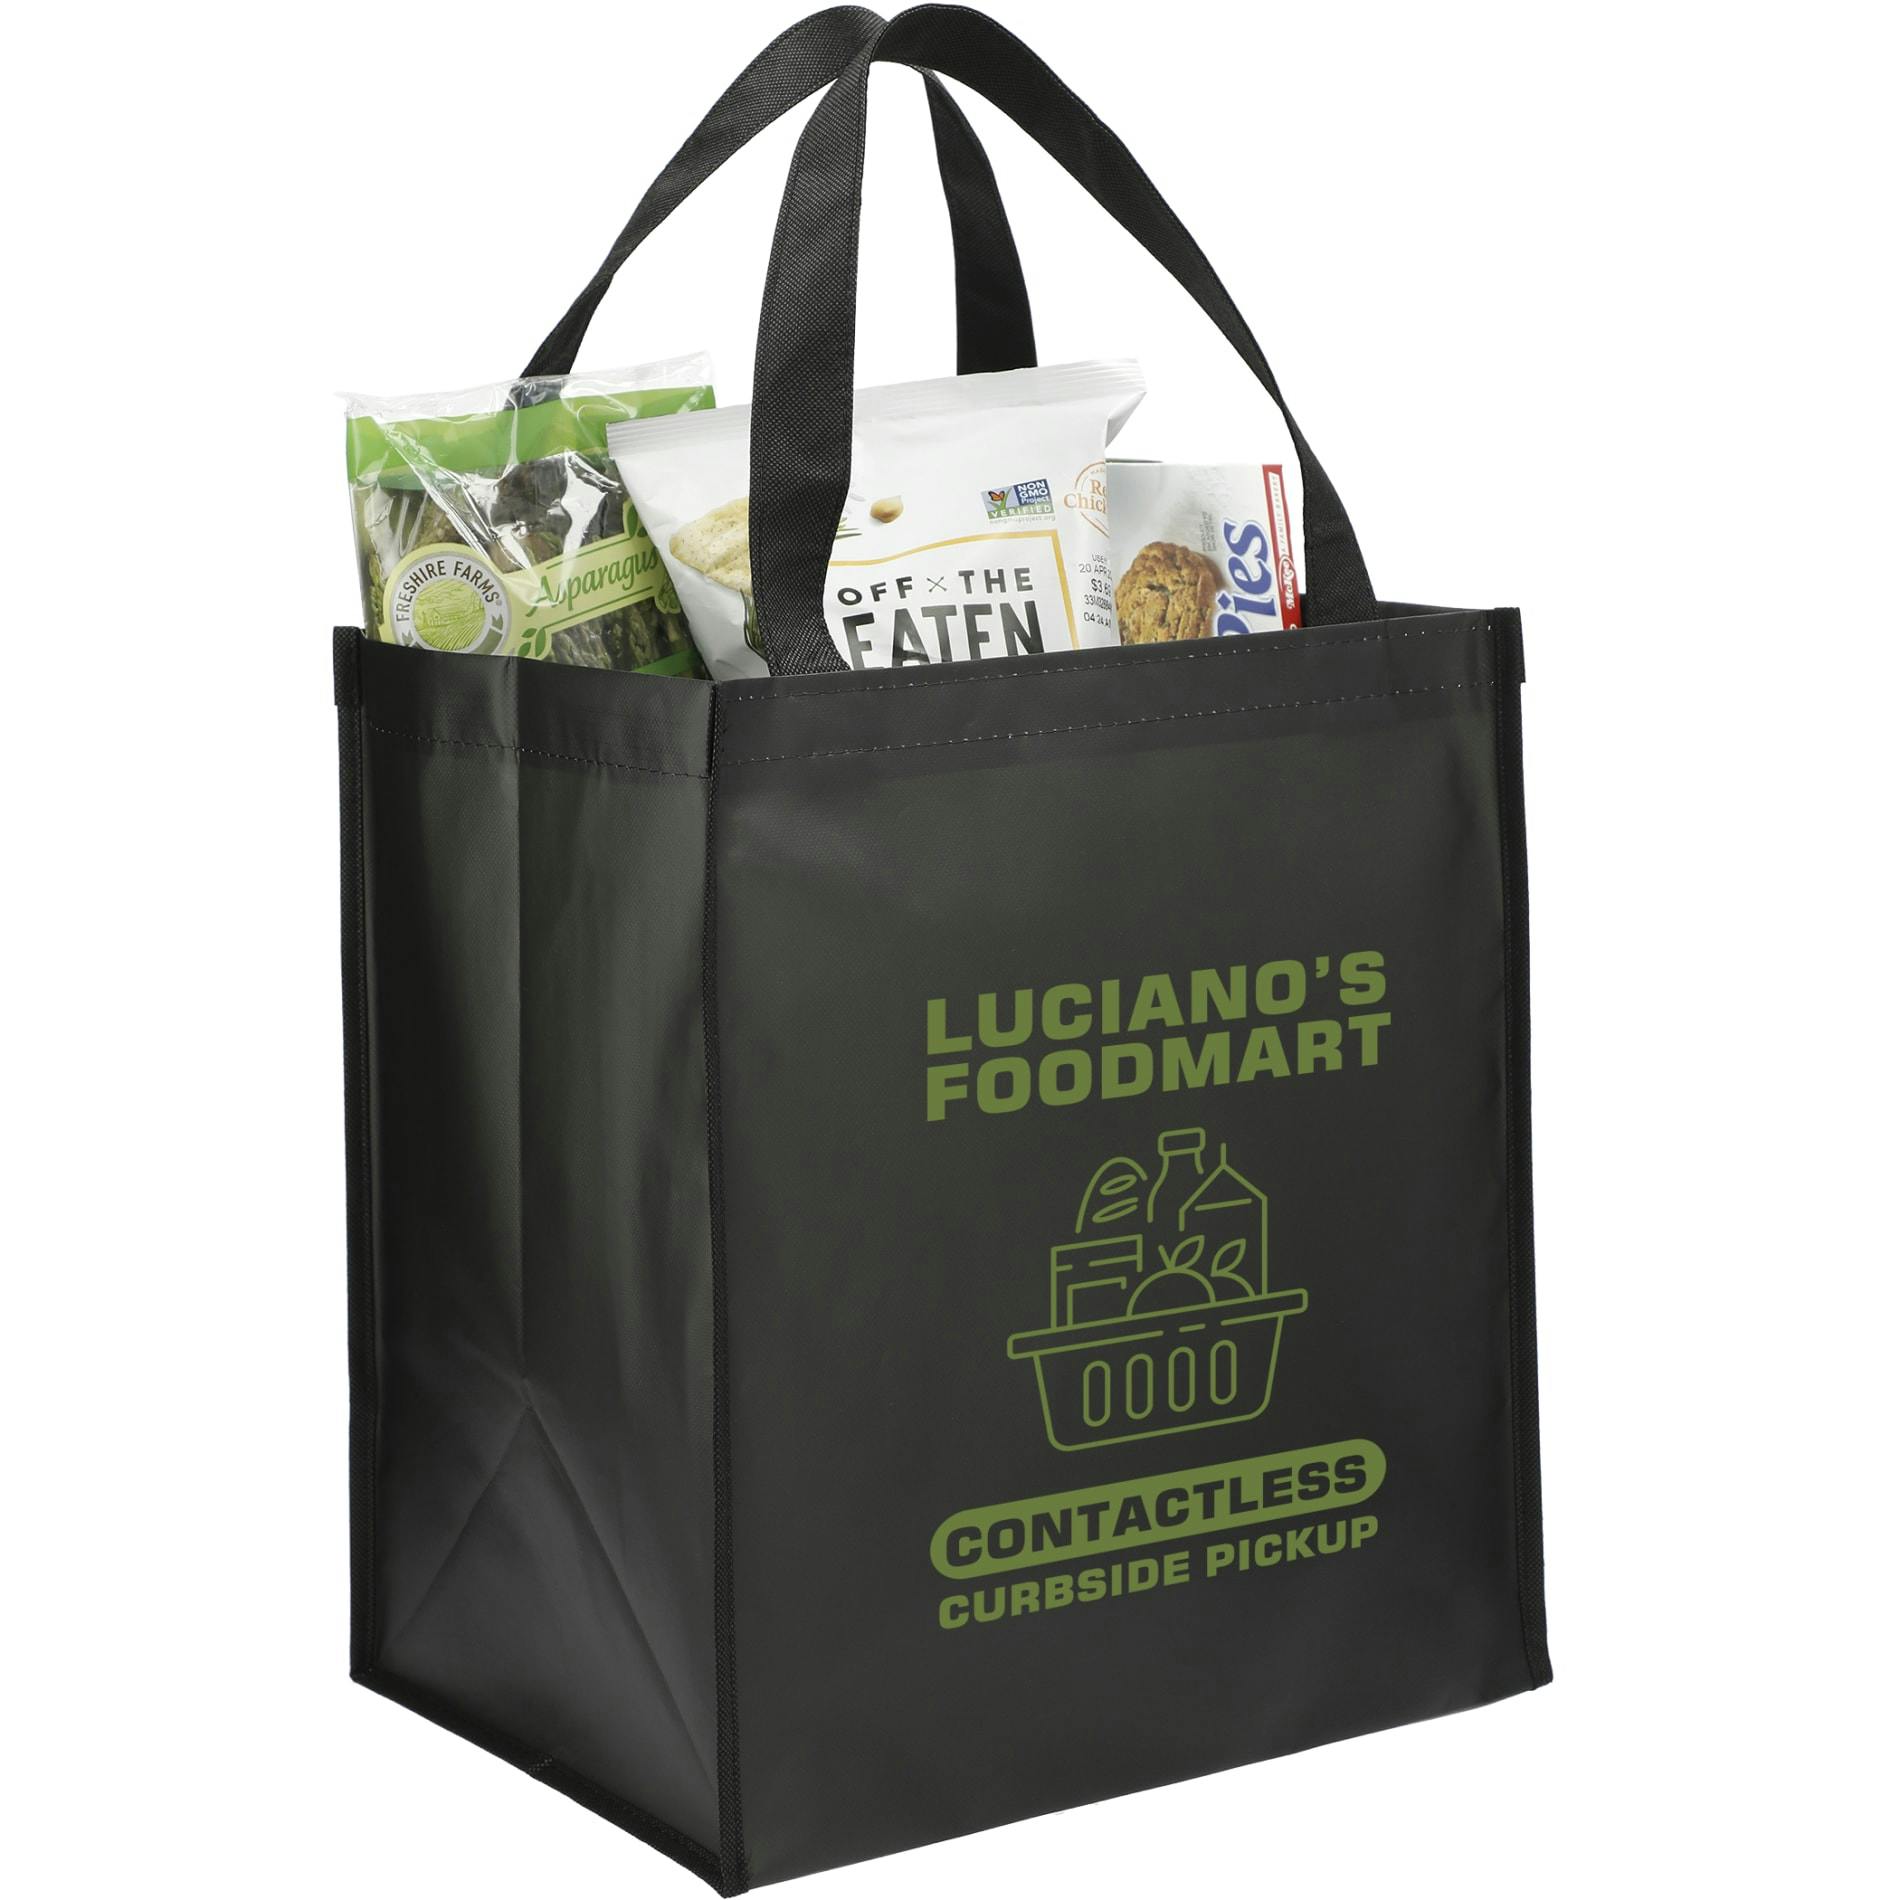 Double Laminated Wipeable Grocery Tote - additional Image 1